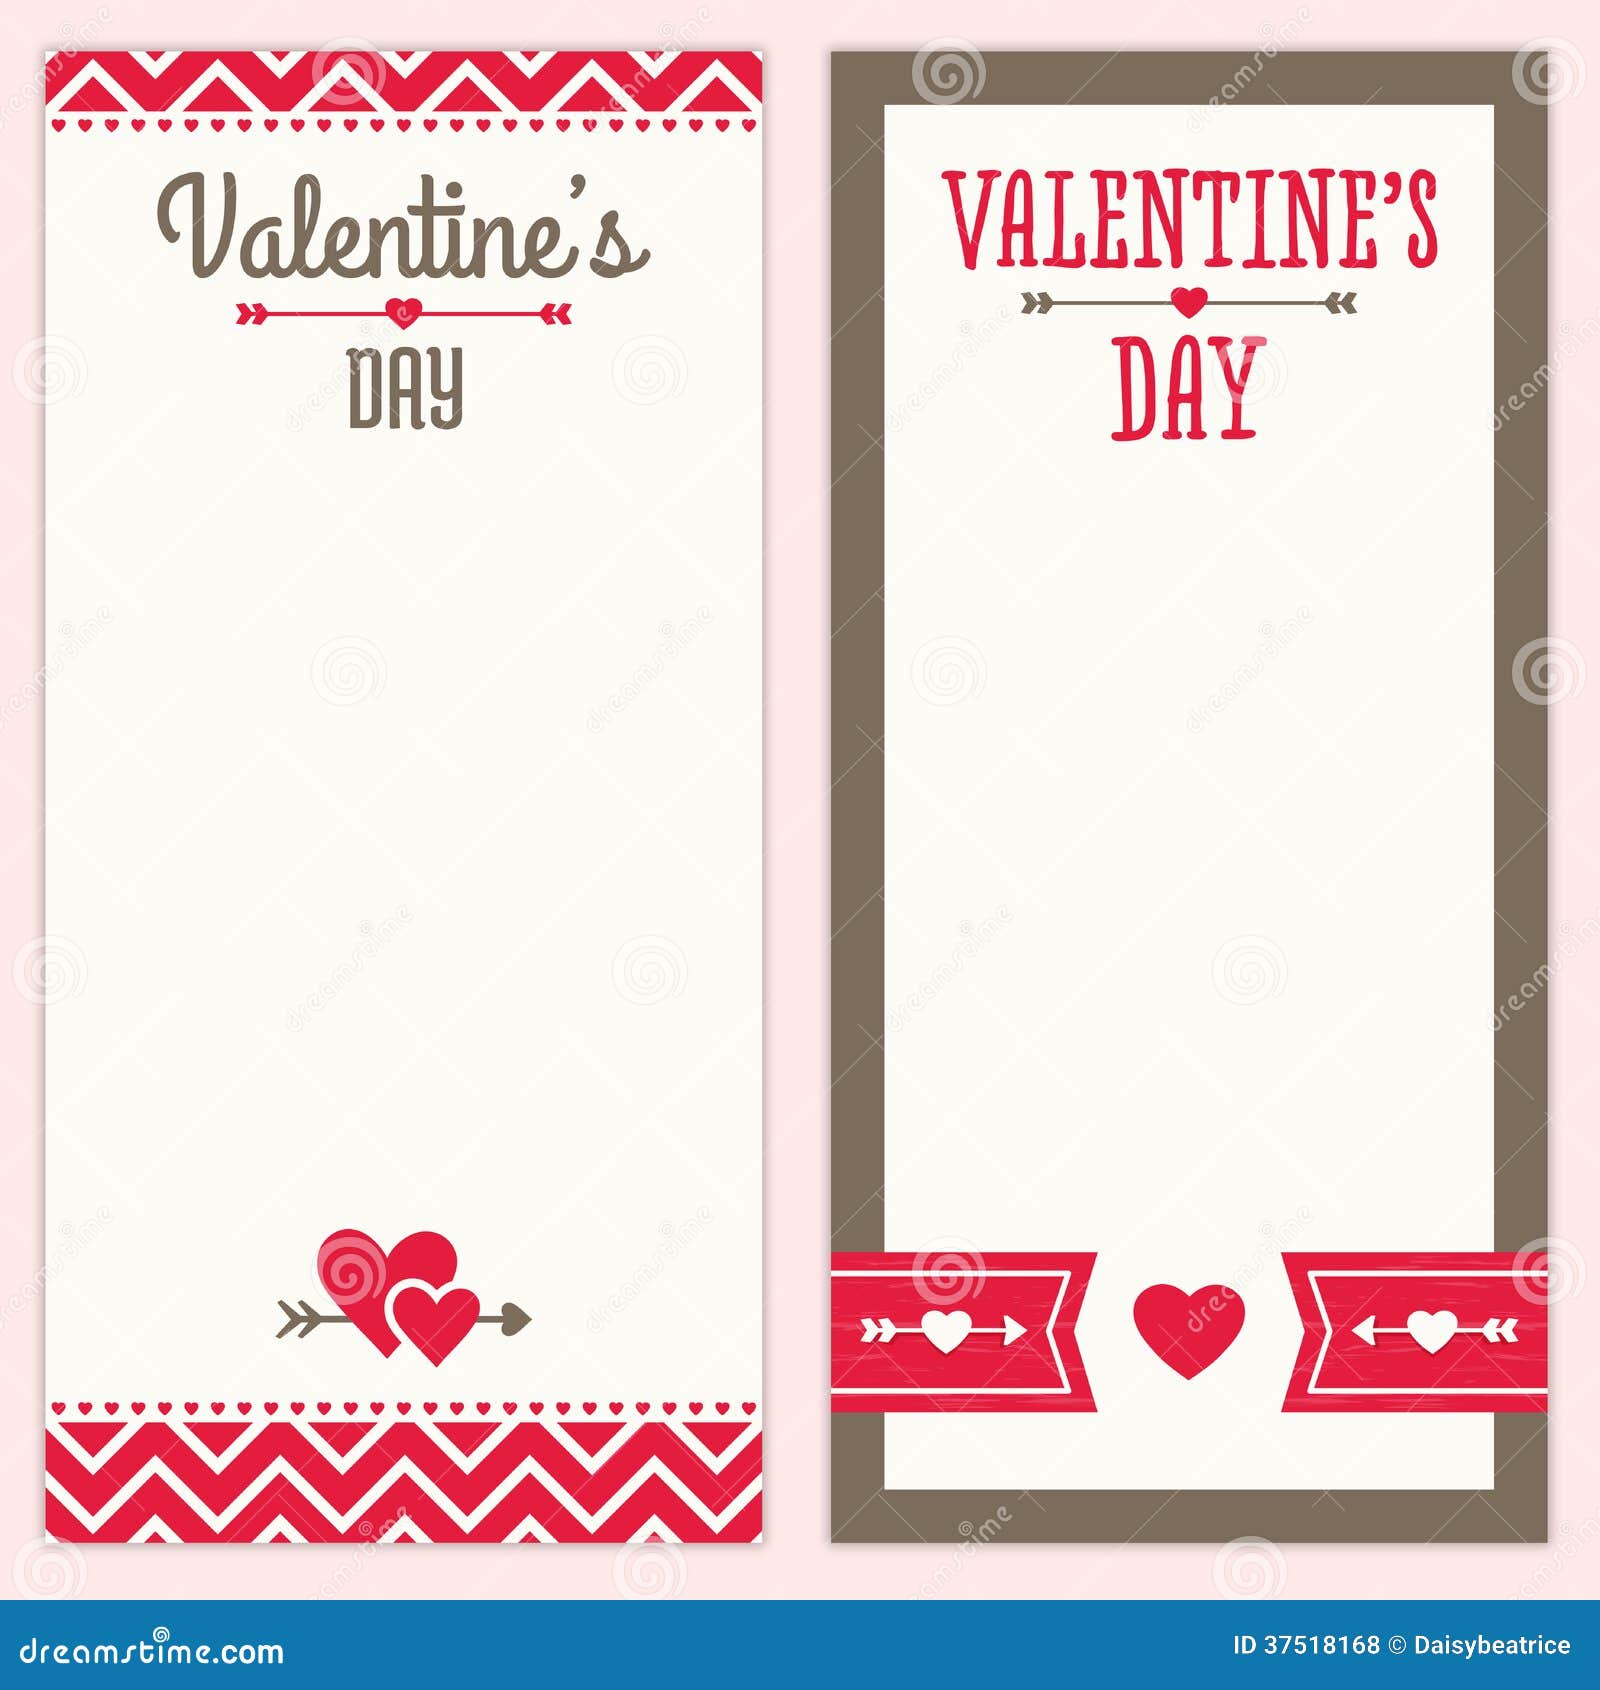 Valentines Day Menu or Invitation Designs in Red a Stock Vector Pertaining To Free Valentine Menu Templates